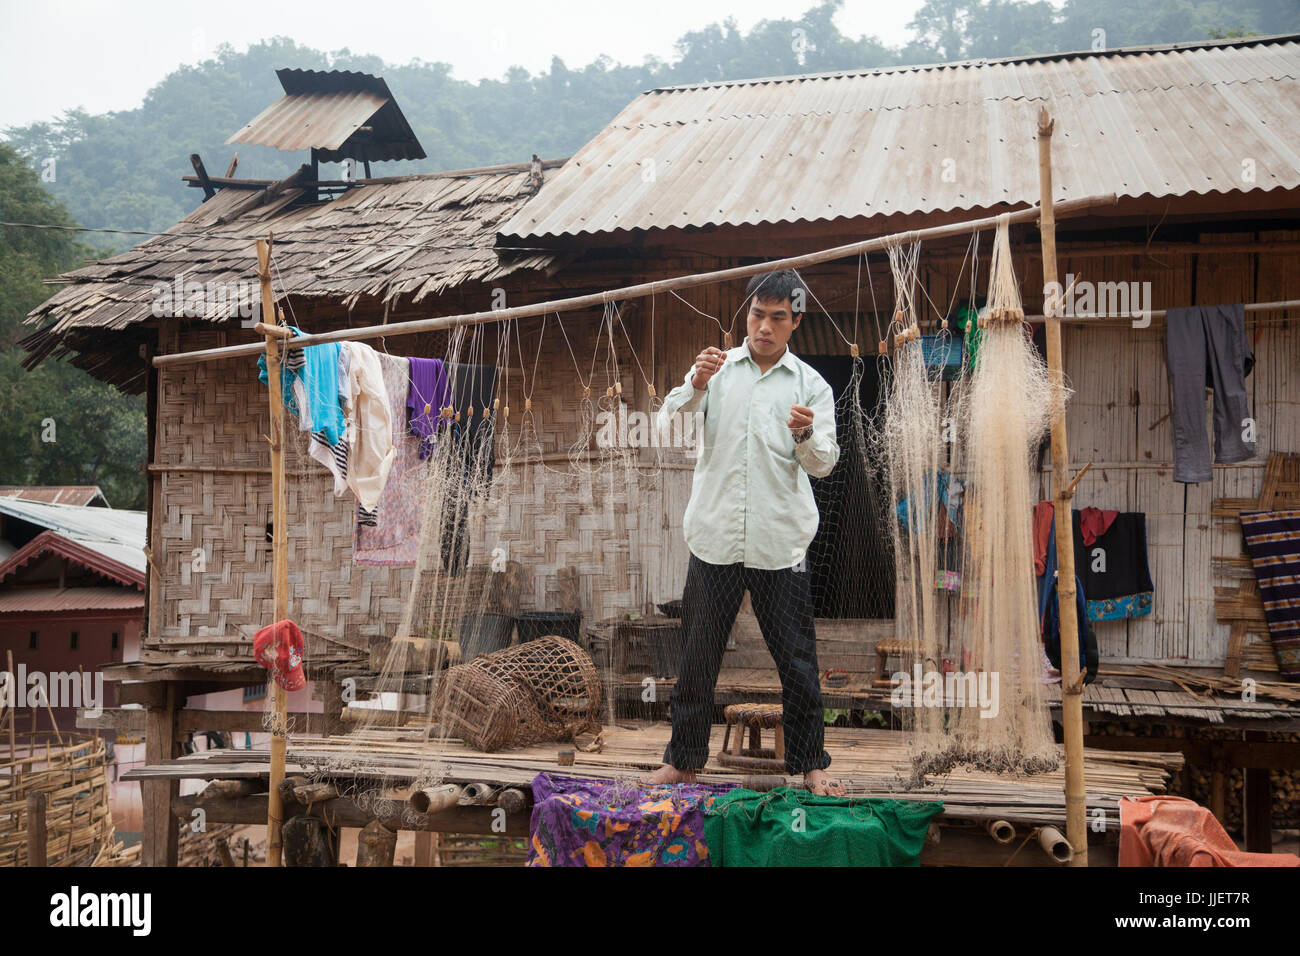 A man repairs his fishing net on his front porch in Muang Hat Hin, Laos. Stock Photo